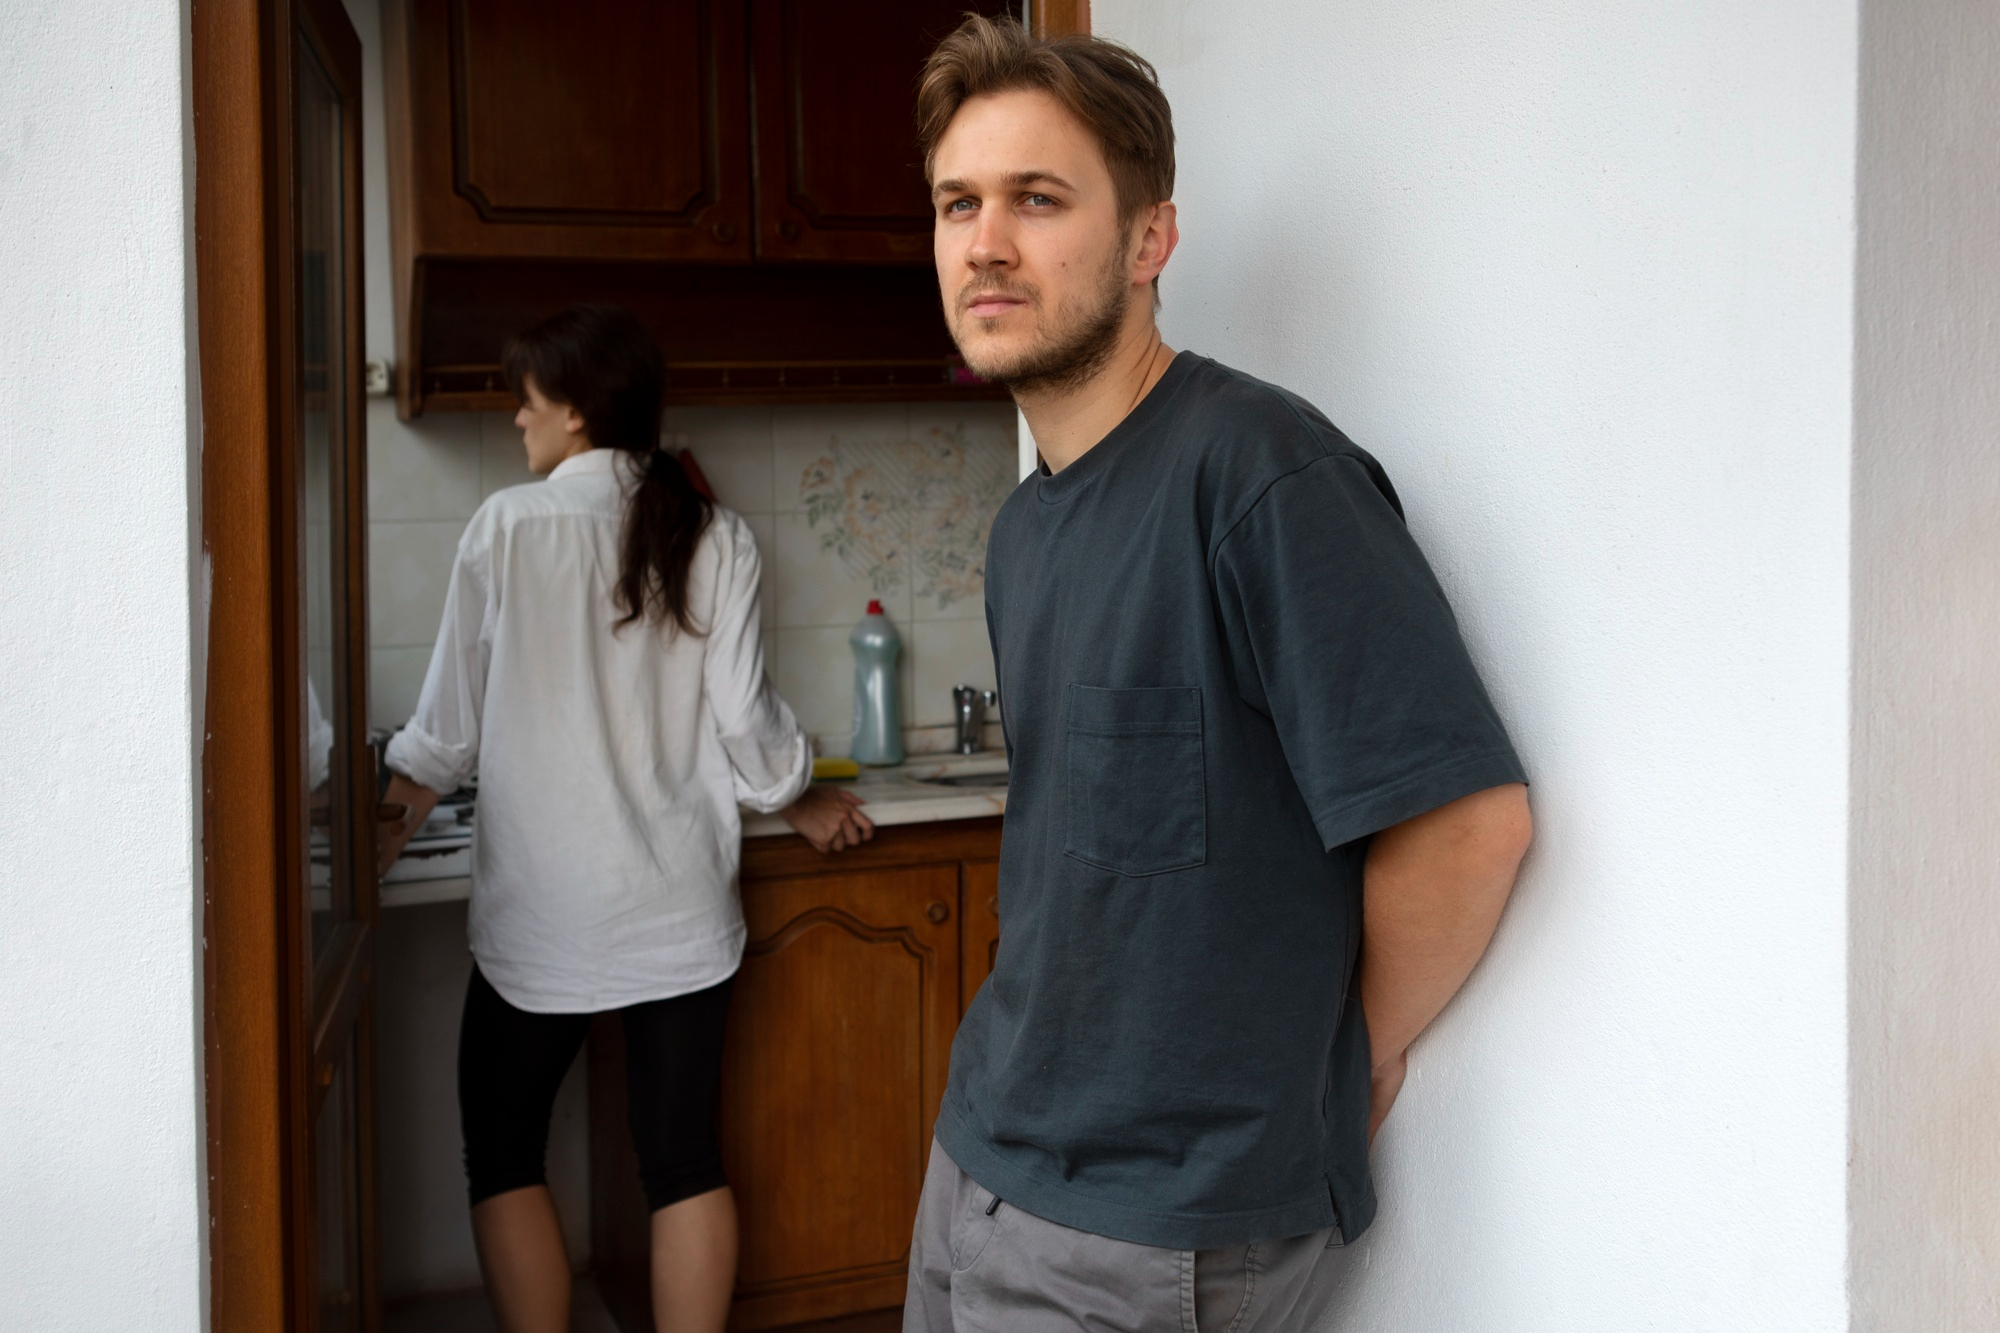 An upset man standing by the door while a woman stands in the kitchen | Source: Freepik